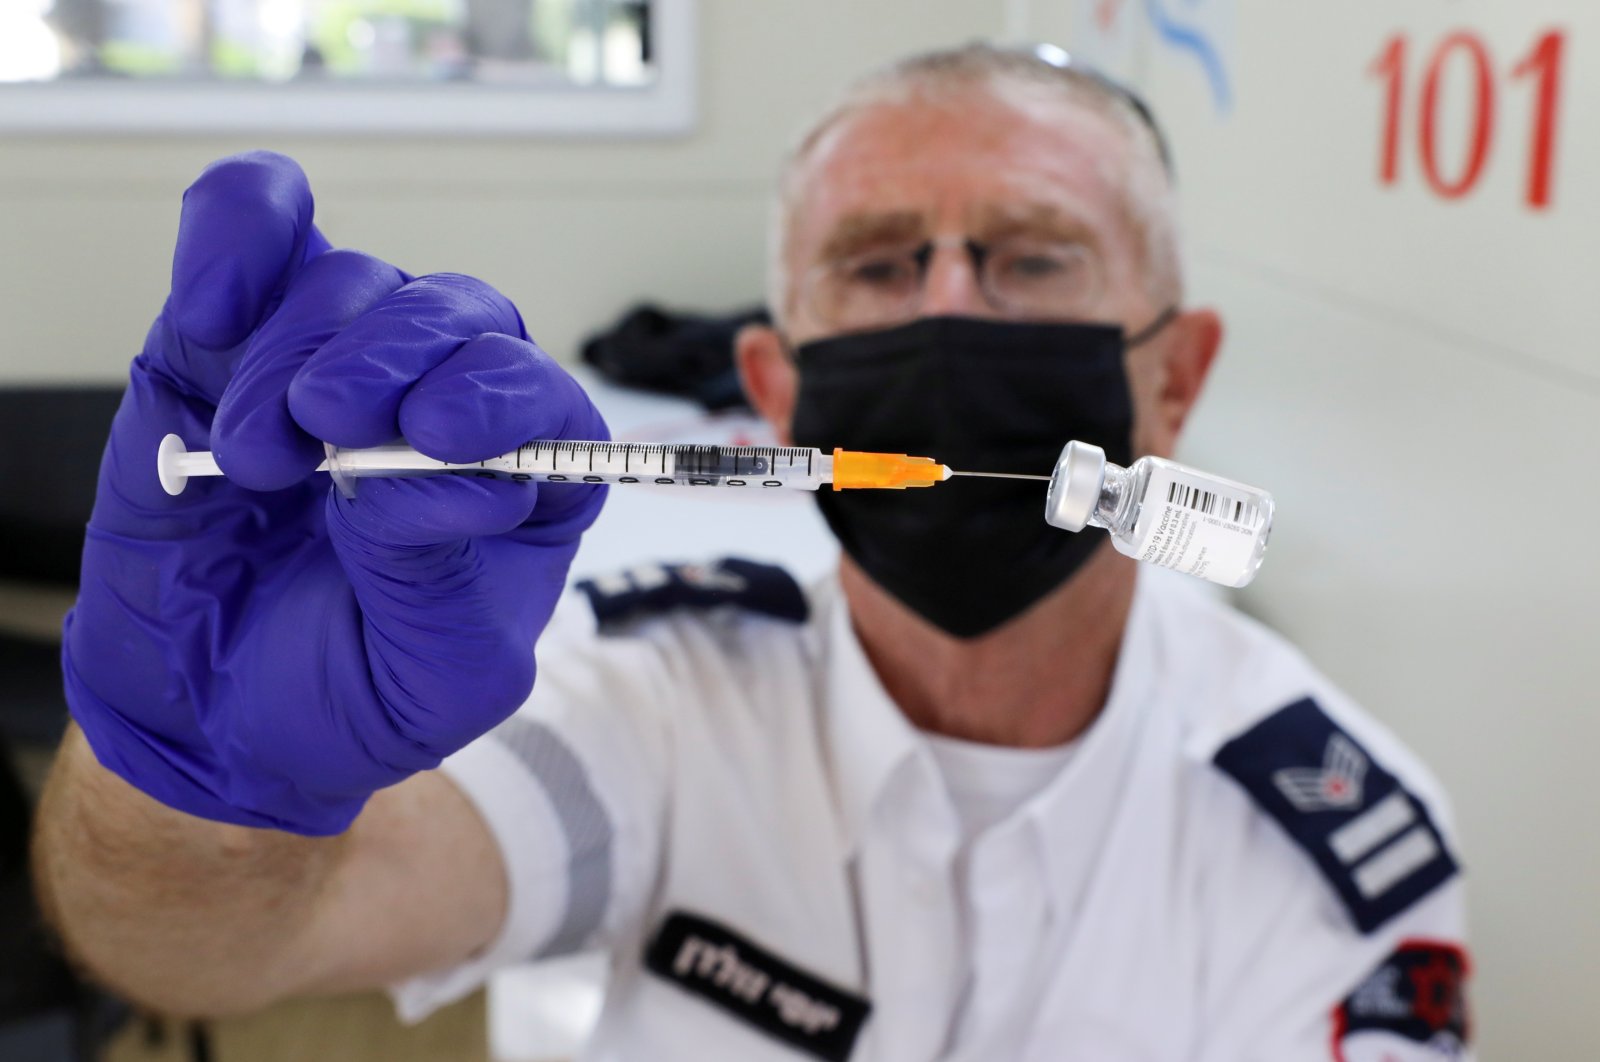 A health worker prepares a vaccination against COVID-19 at a mobile vaccination center, as Israel continues to fight against the spread of the delta variant, in Tel Aviv, Israel, July 6, 2021. (Reuters Photo)